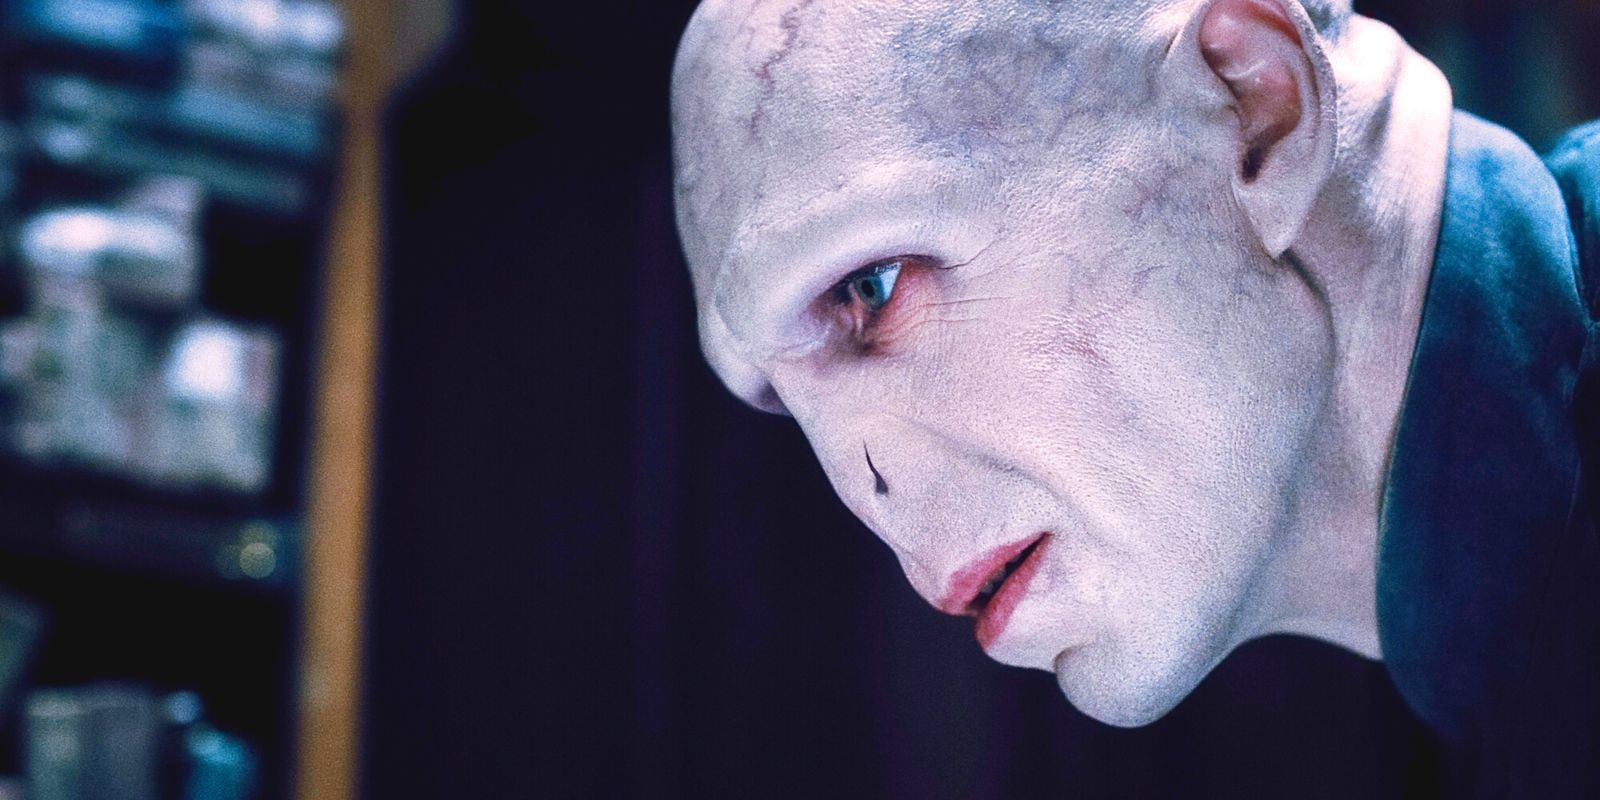 Ralph Fiennes as Voldemort looking intently in Harry Potter.